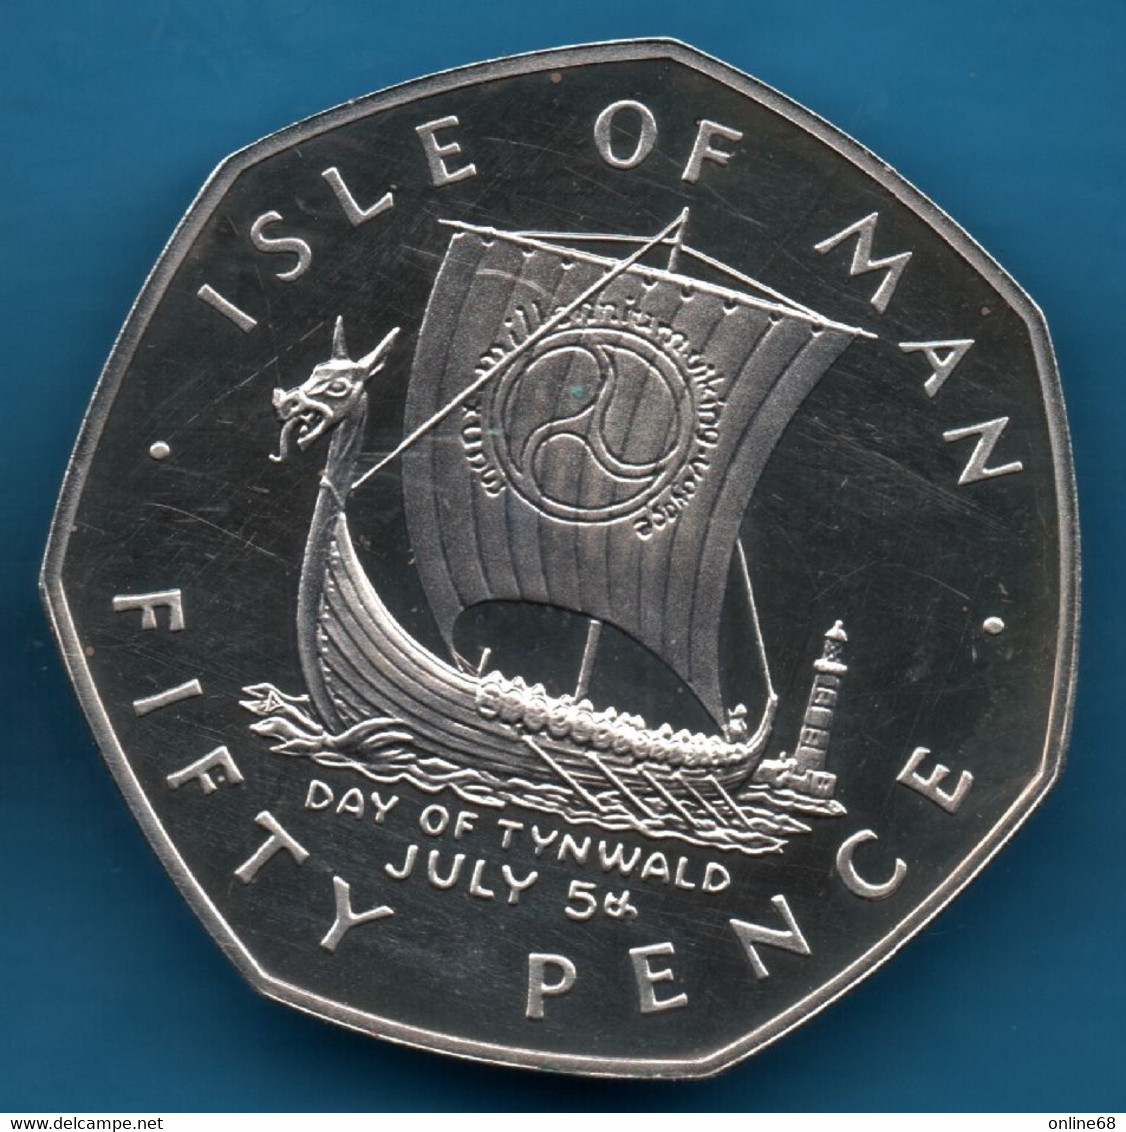 ISLE OF MAN 50 PENCE 1979 D KM# 51a DAY OF TYNWALD  Silver Proof  .925 Argent - Île De  Man